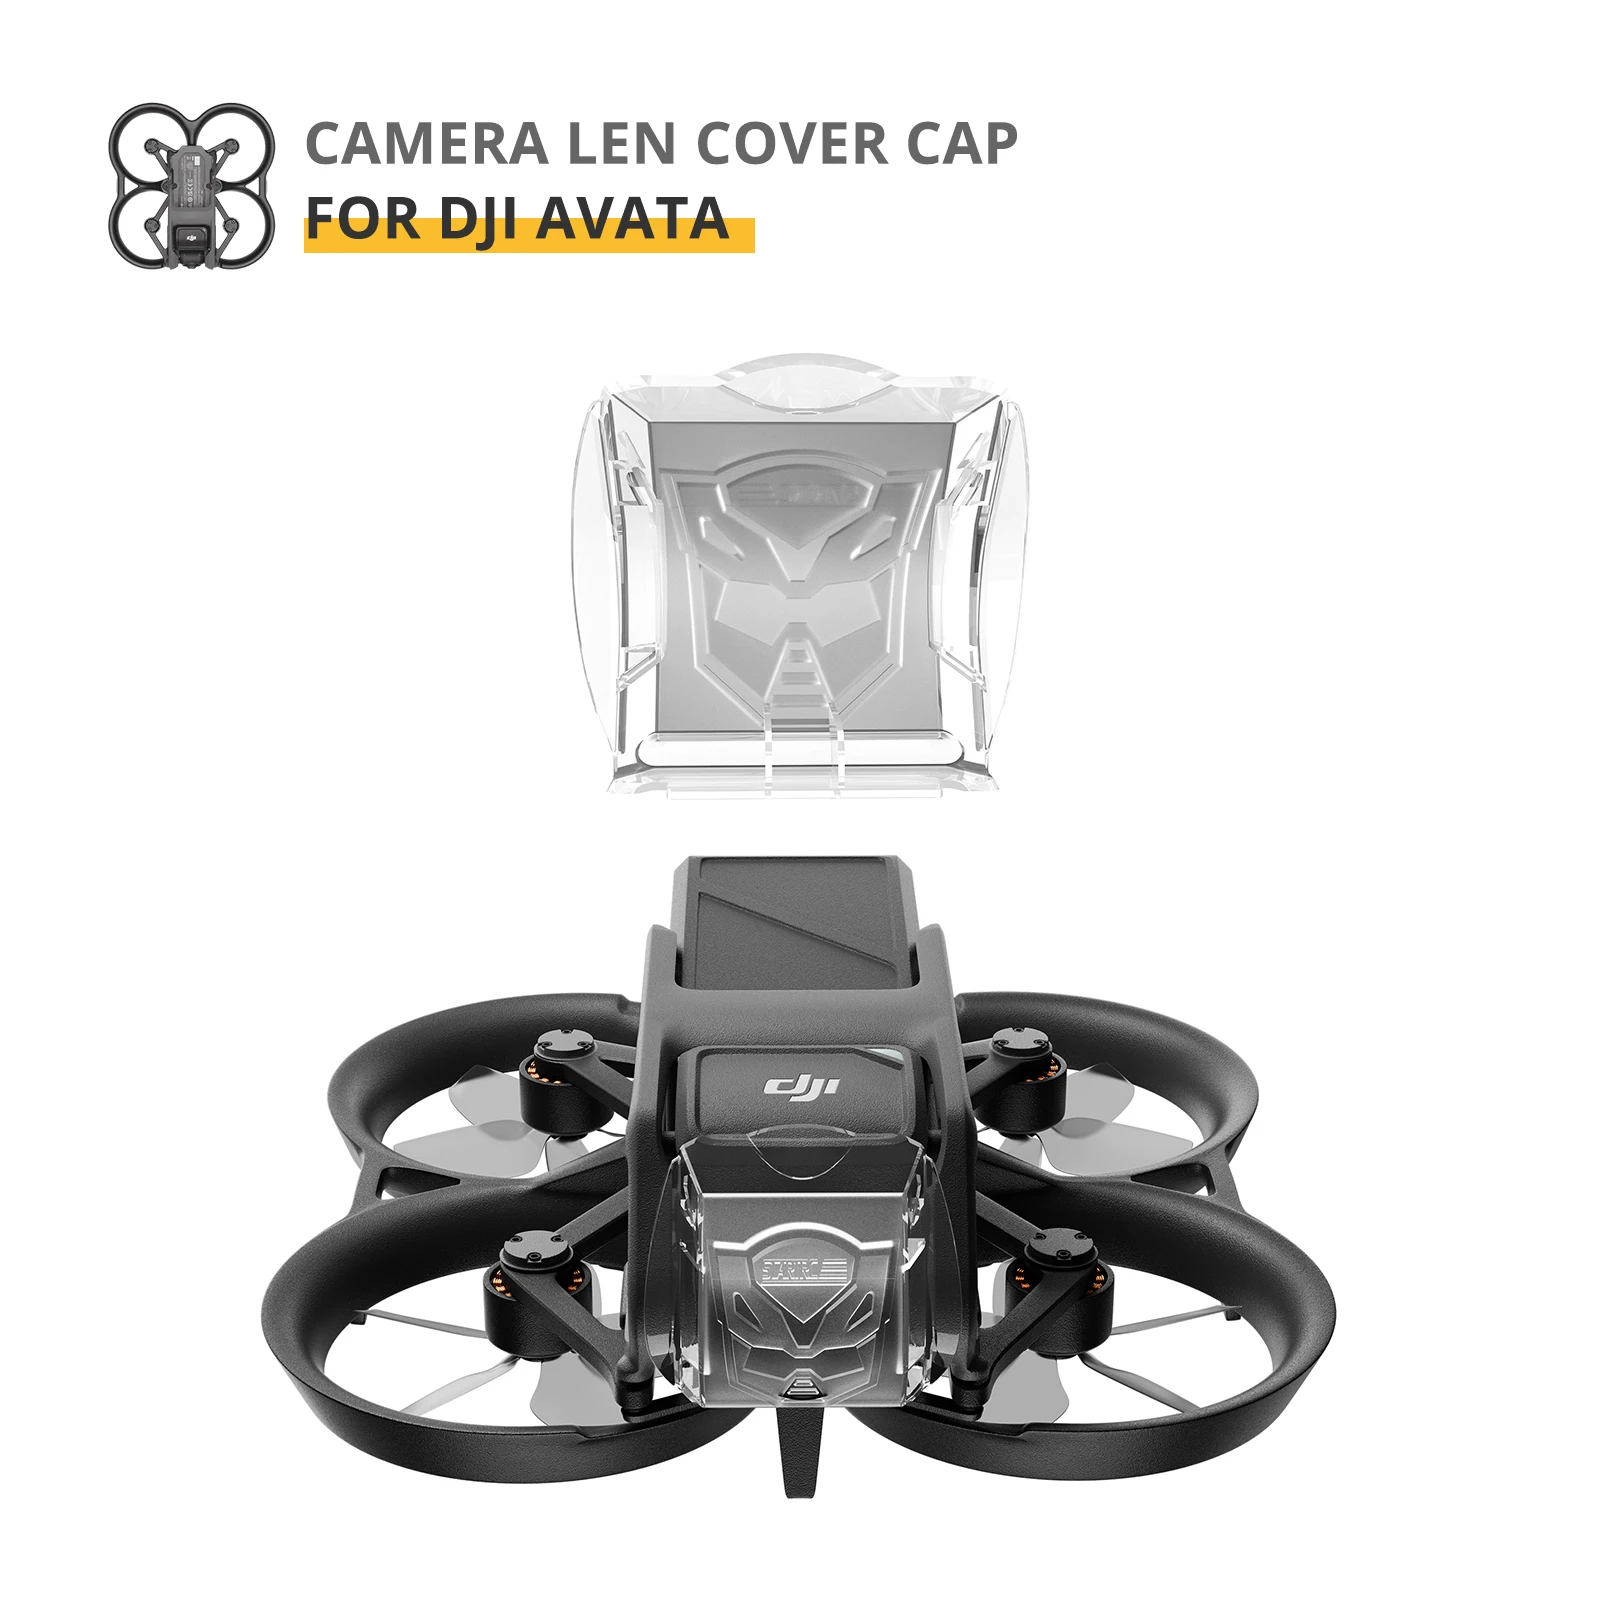 

Camera Len Cover Cap for Avata Drone Gimbal Lock Stabilizer Lens Protection Guard Lens Hood Cap for DJI AVATA Drone Accessories